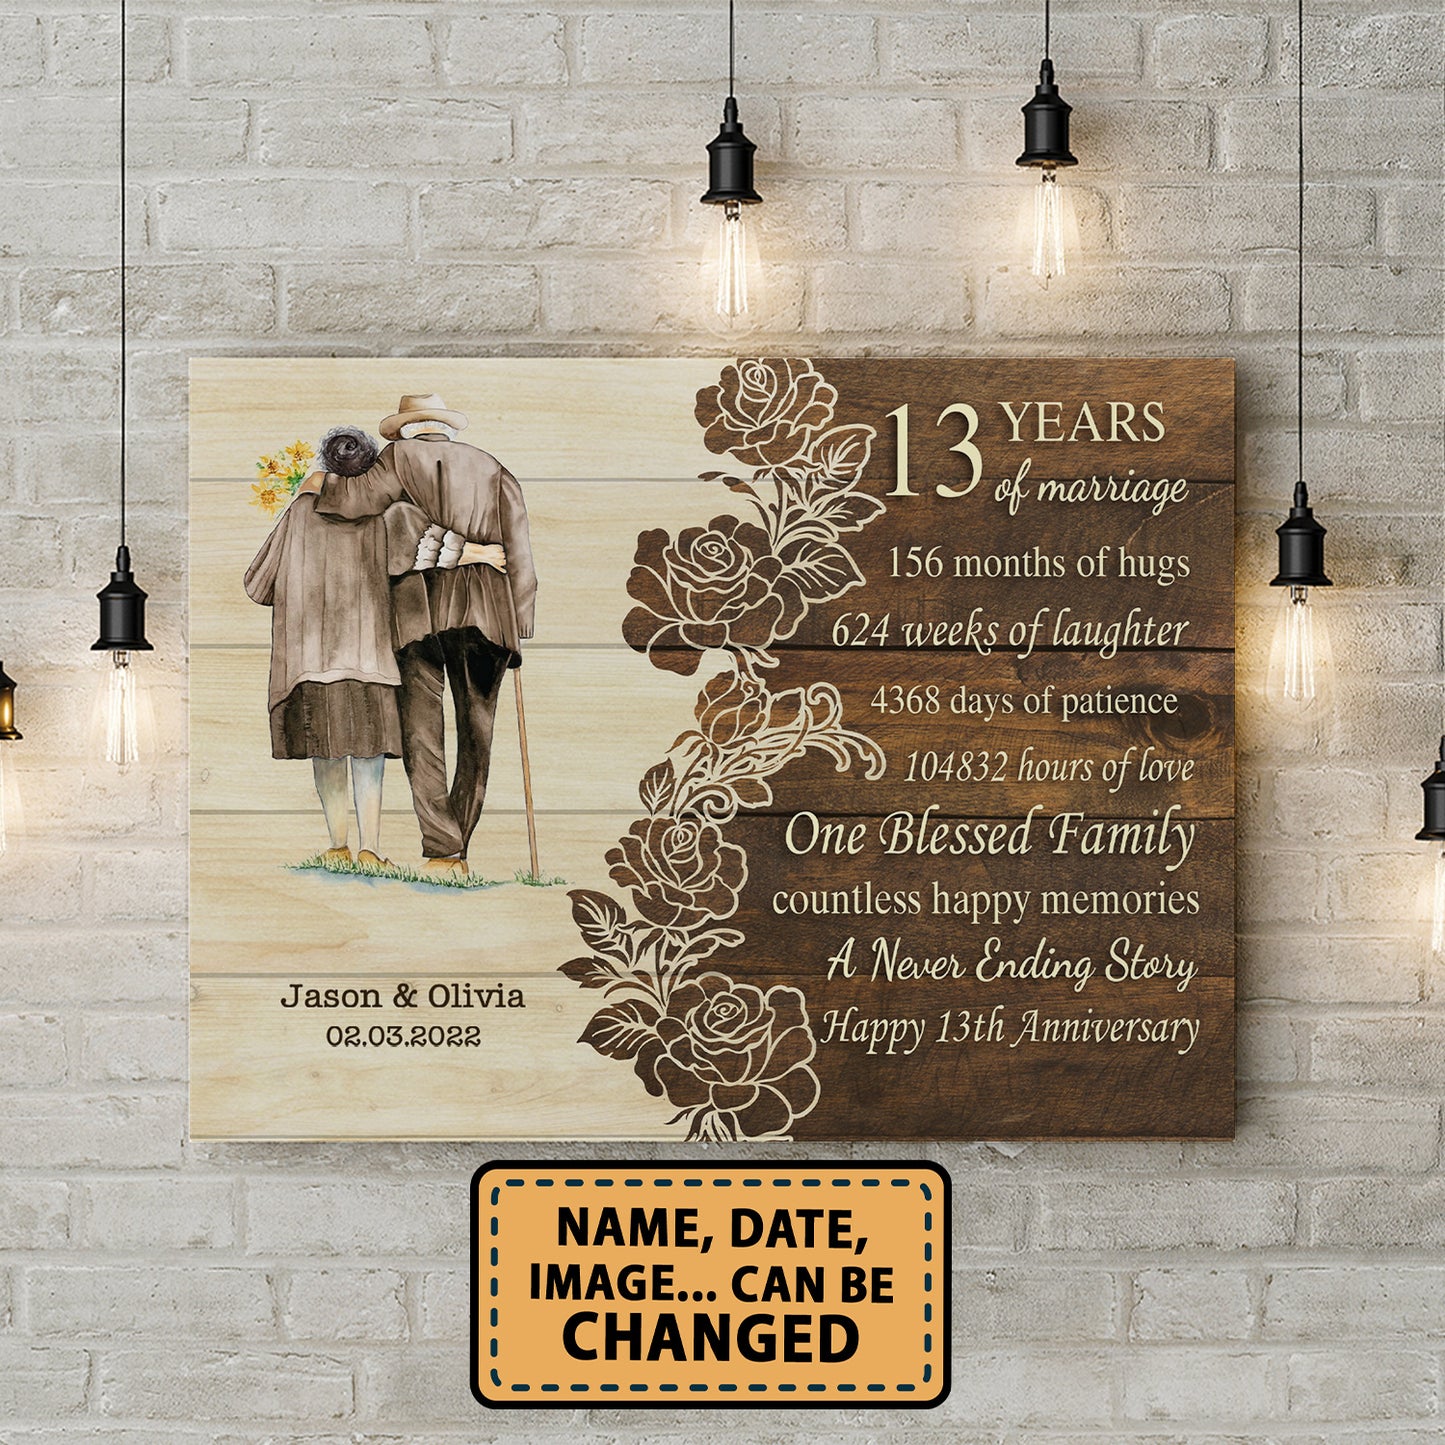 Happy 13th Anniversary 13 Years Of Marriage Personalizedwitch Canvas